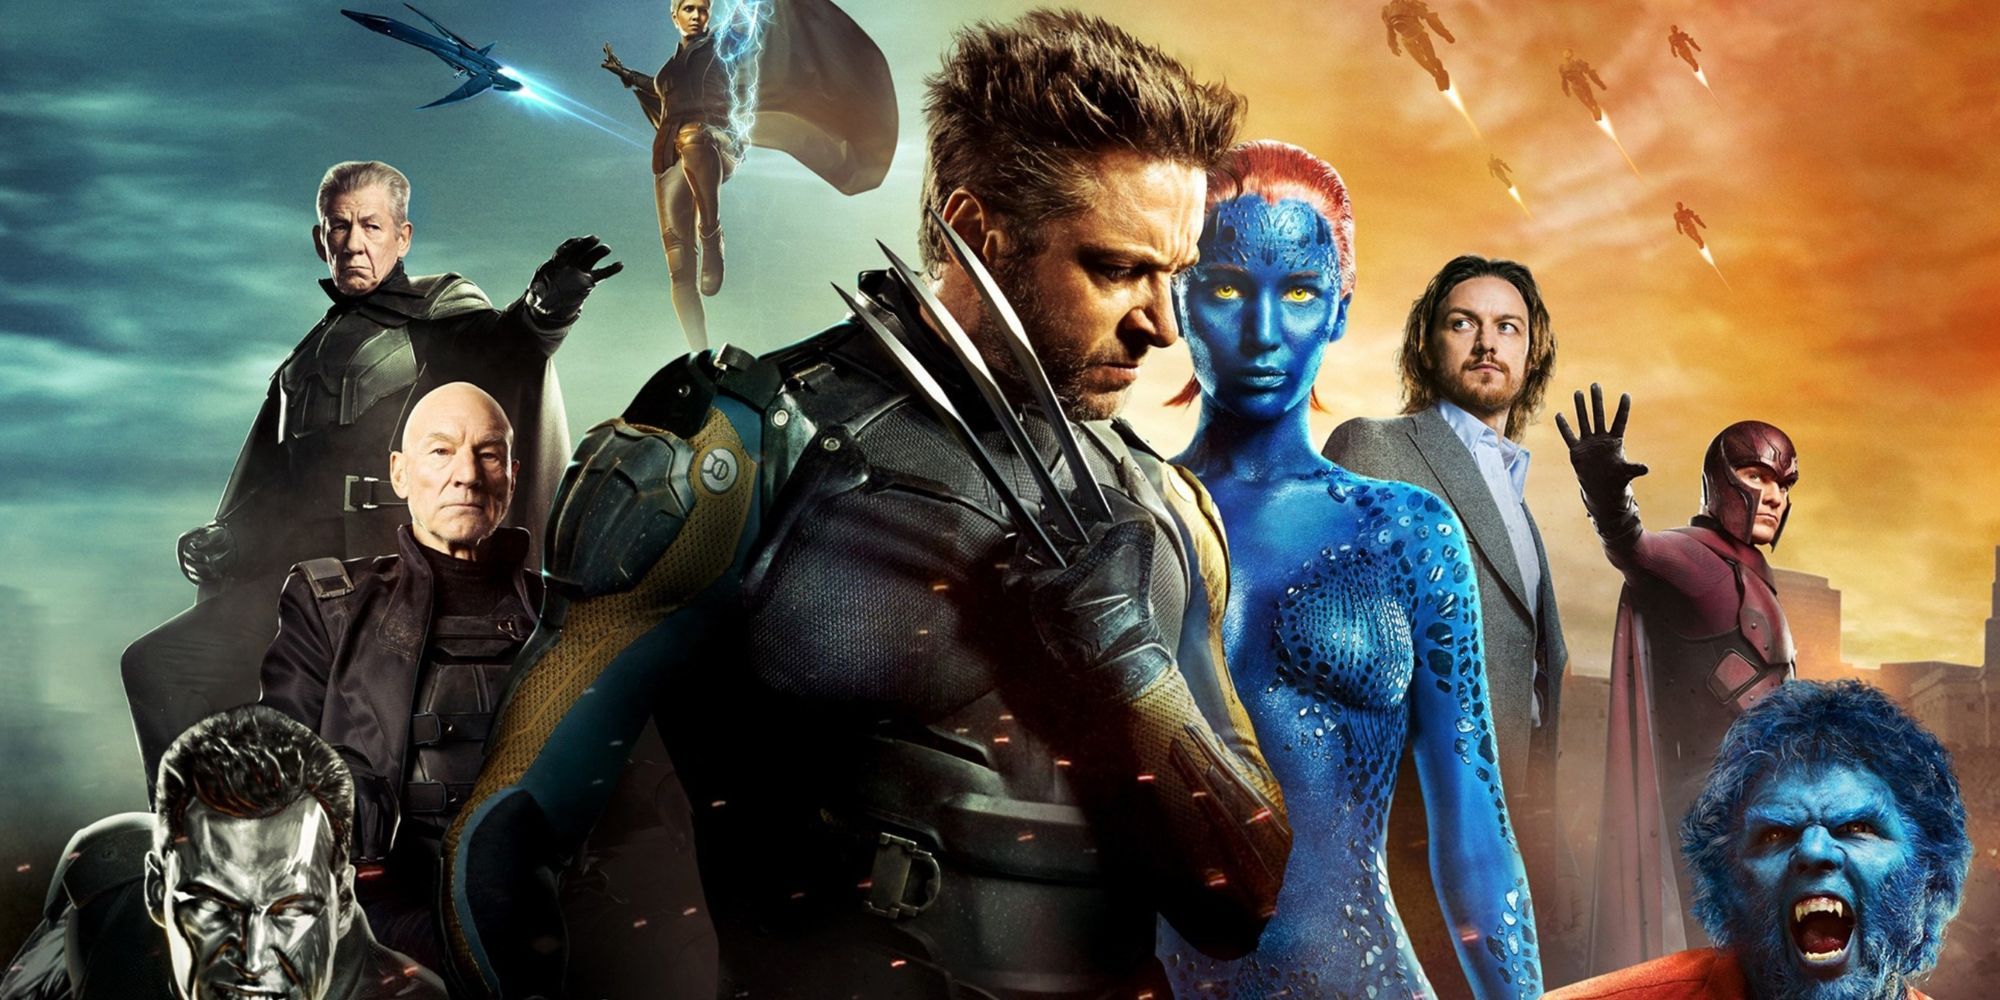 Promotional image for 'X-Men: Days of Future Past' featuring the cast led by Hugh Jackman as Wolverine.